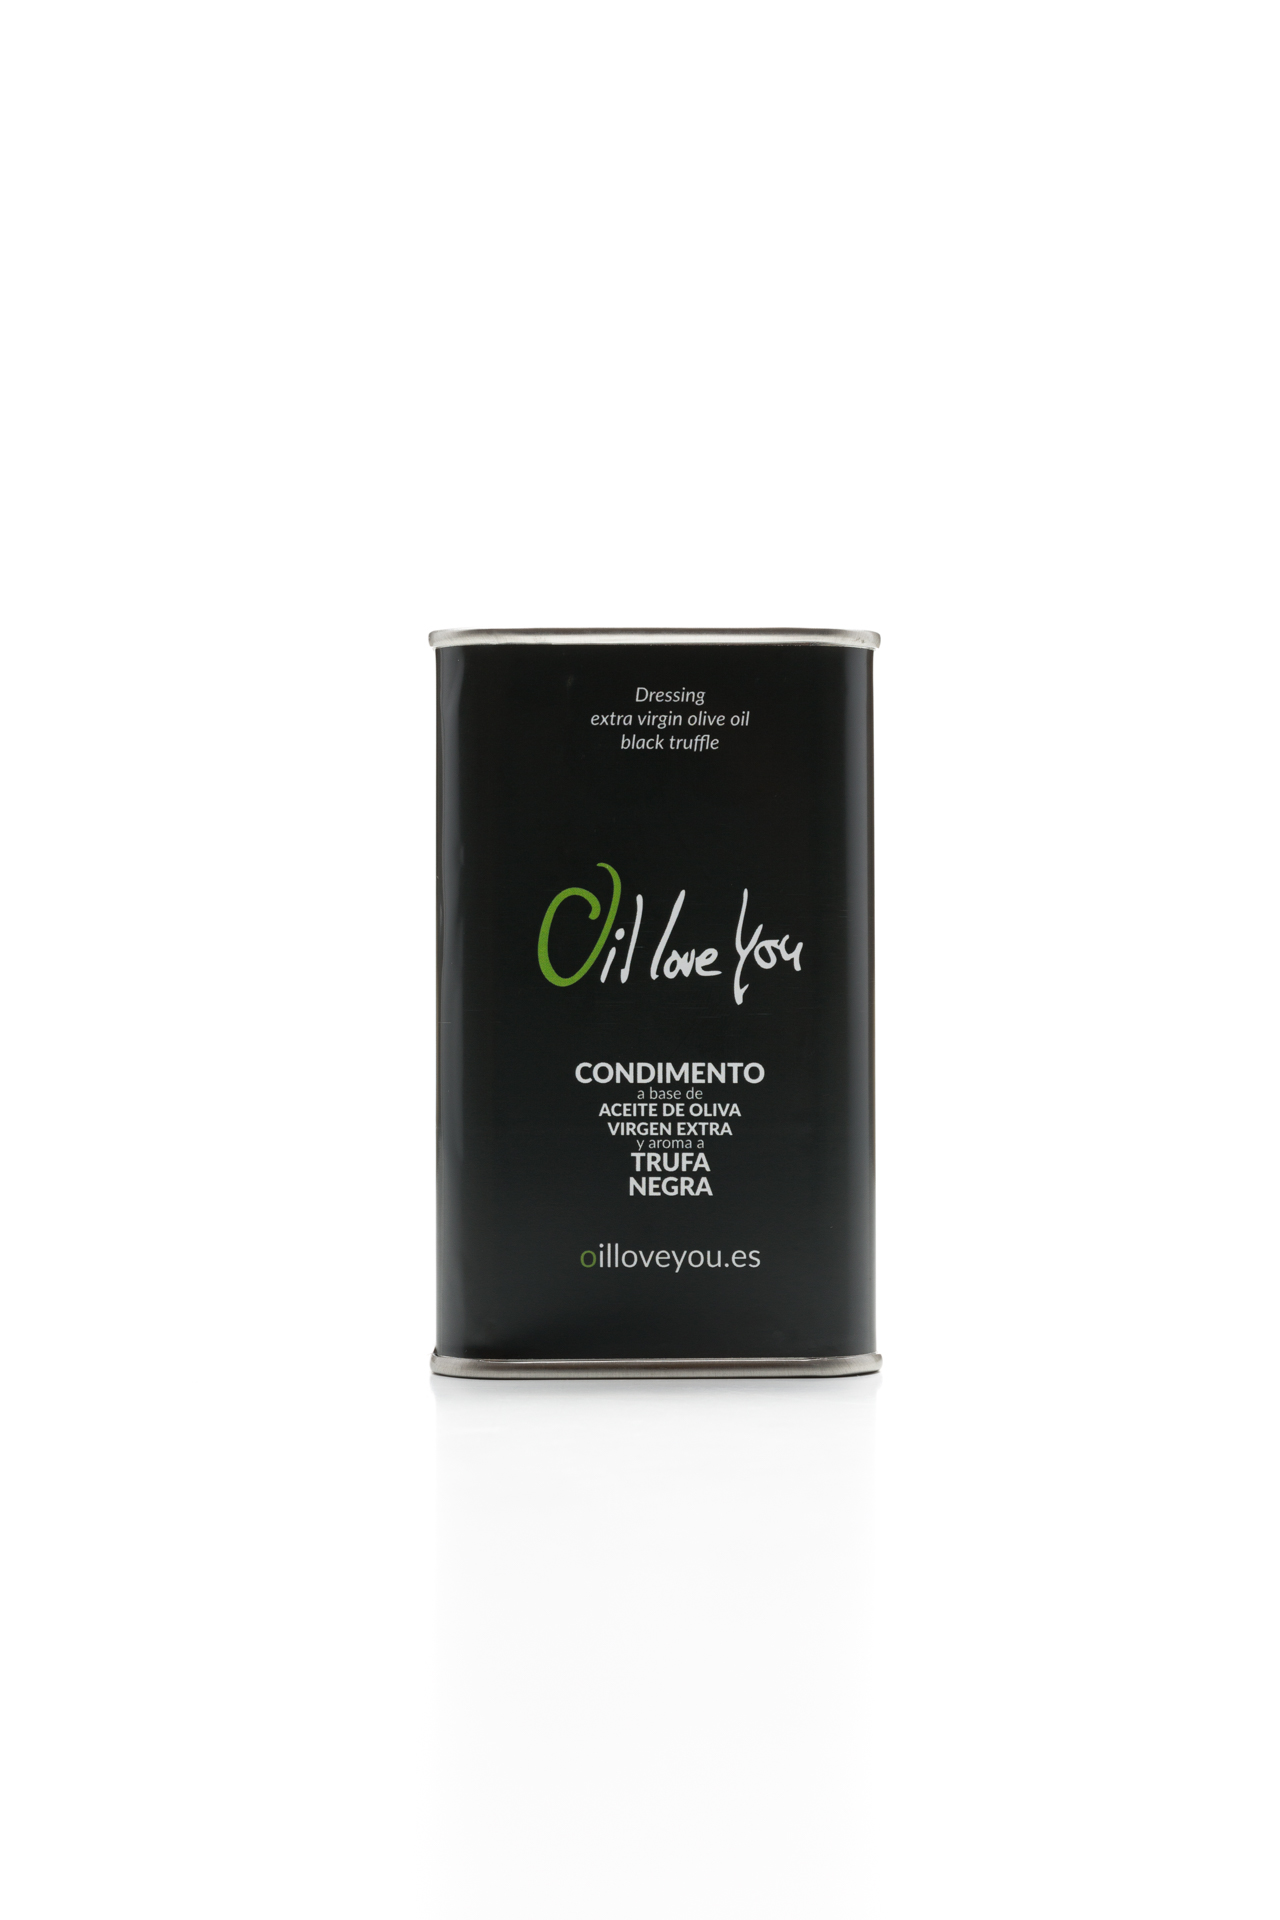 Can of EVOO Oil Love You flavored with black truffle 250 ml oilloveyou (3)